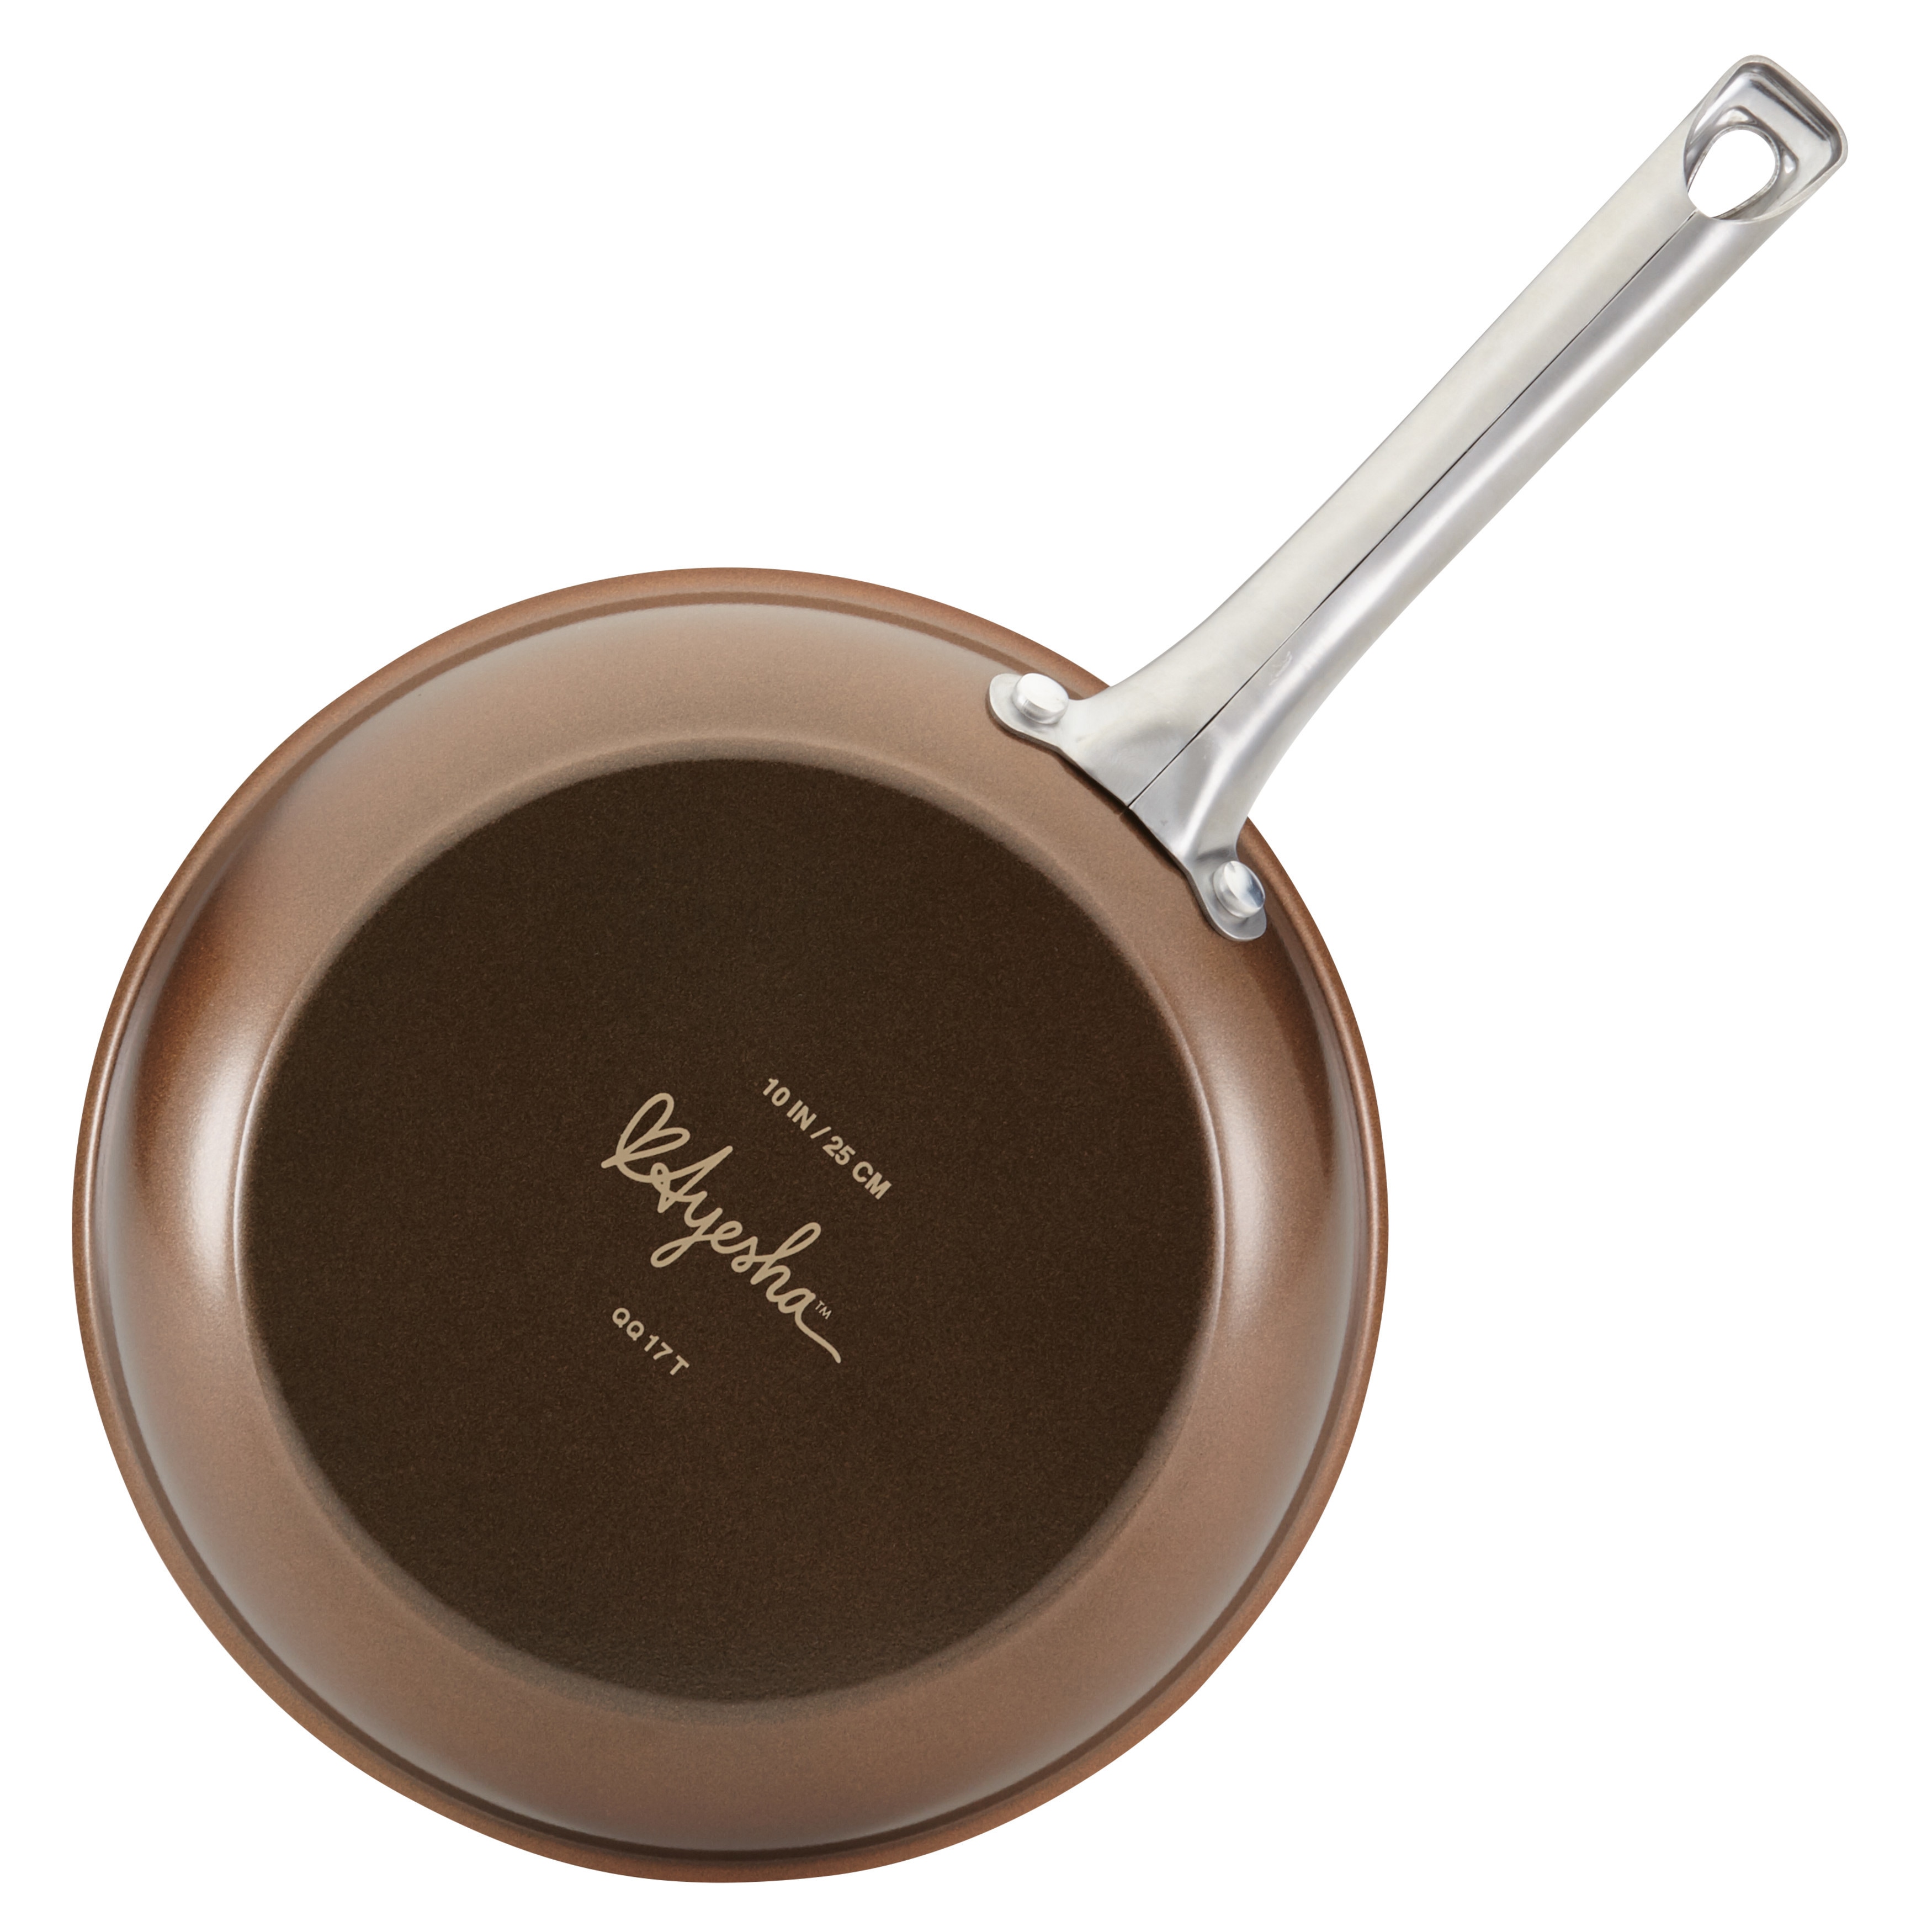 https://ak1.ostkcdn.com/images/products/20005403/Ayesha-Curry-Home-Collection-Porcelain-Enamel-Nonstick-Skillet-10-Inch-025b65bc-7155-4a55-be62-b0a3cea53069.jpg